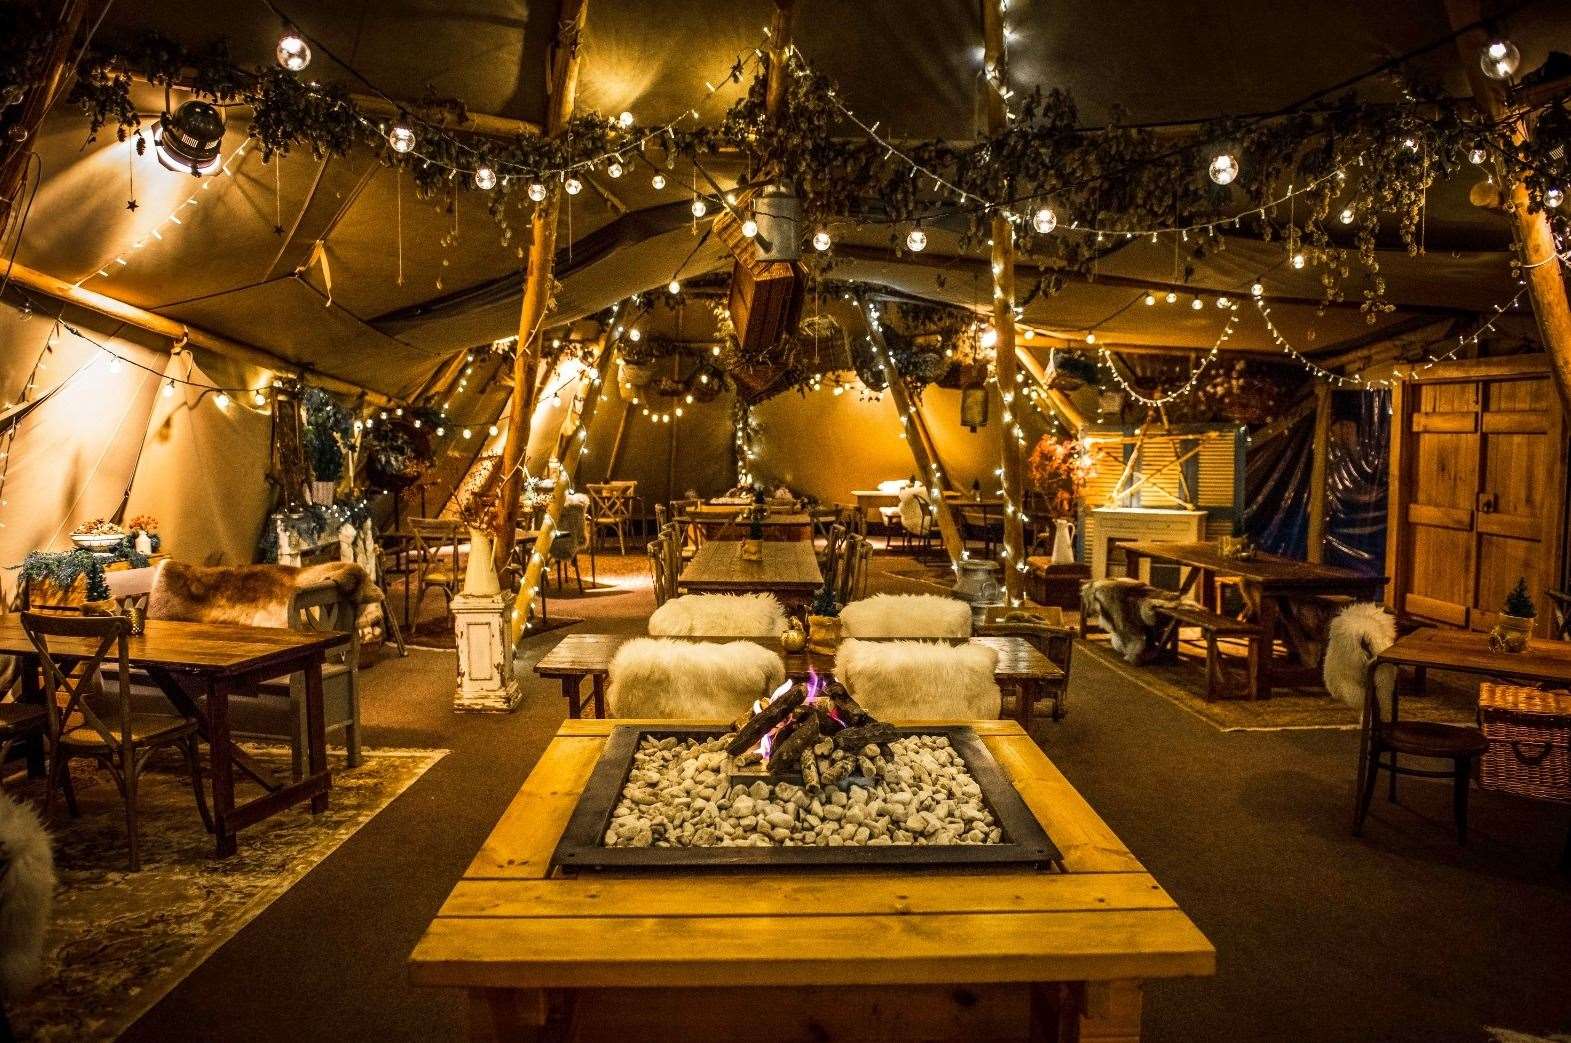 Outdoor dining returns post-lockdown at Tipis Restaurant at The Gardens in Yalding near Maidstone. Picture: Fleur Challis Food & Commercial